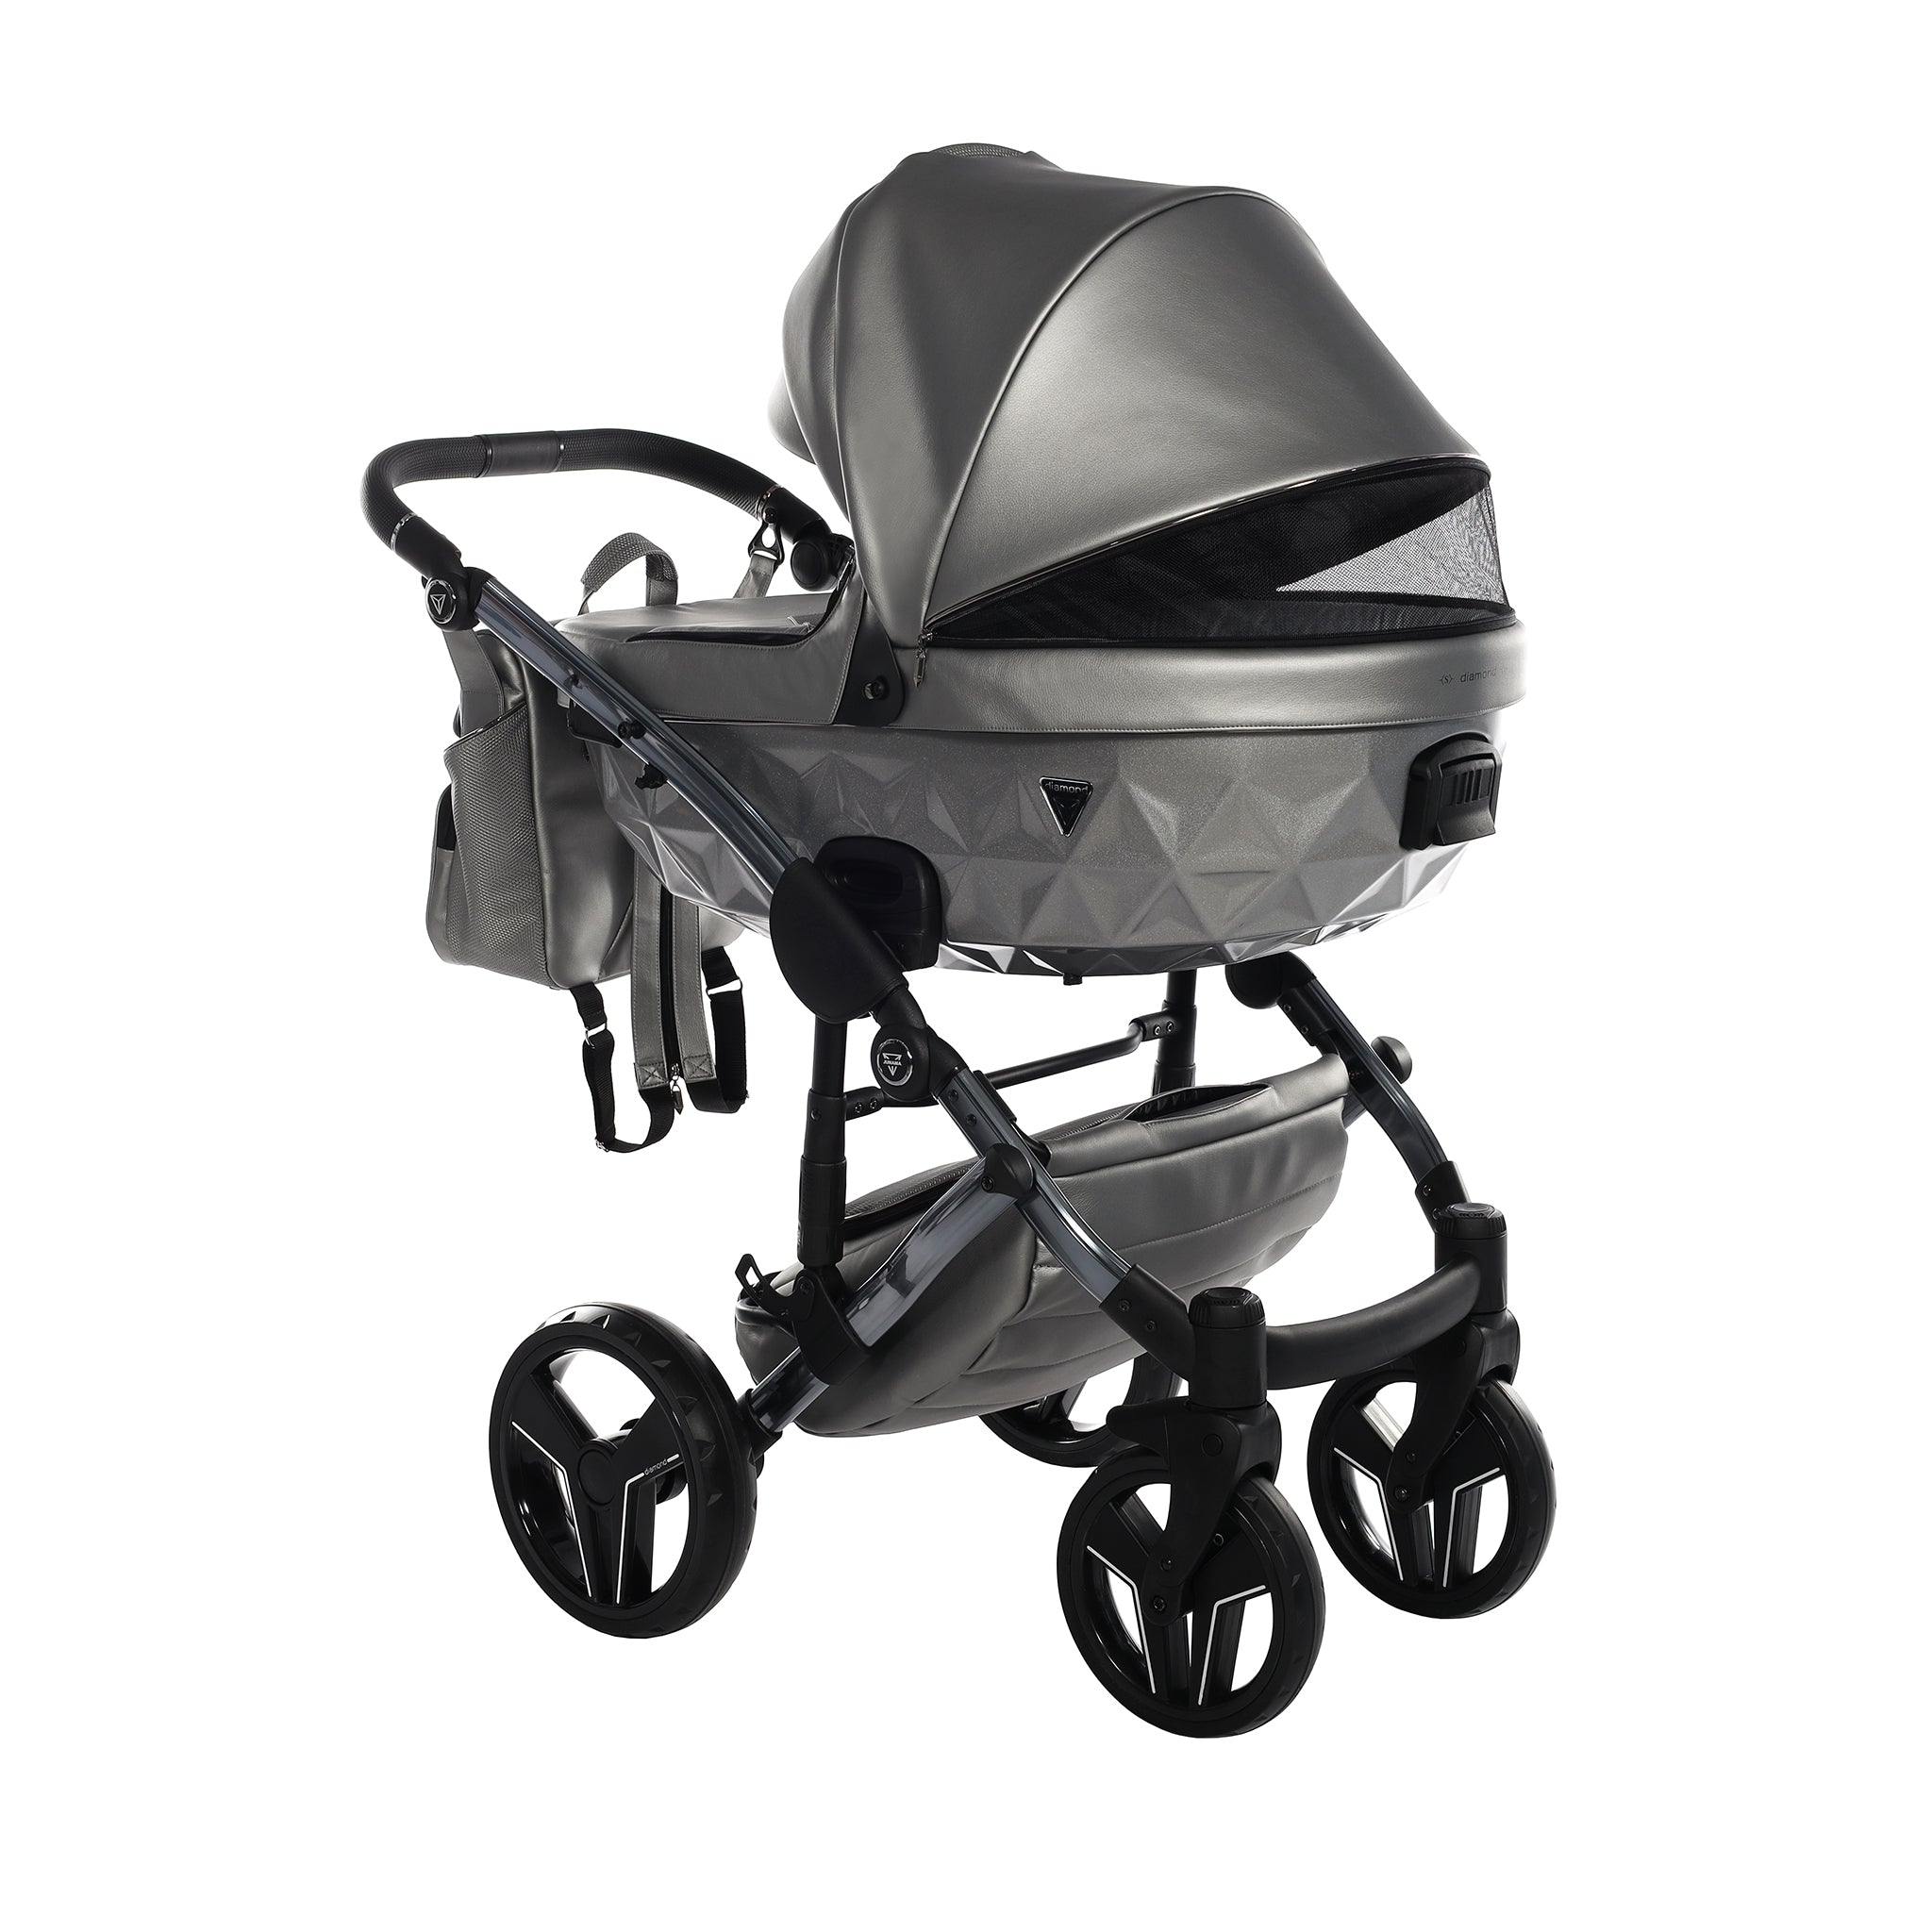 Junama S Class, baby prams or stroller 2 in 1 - Silver and Black, Code number: JUNSC09